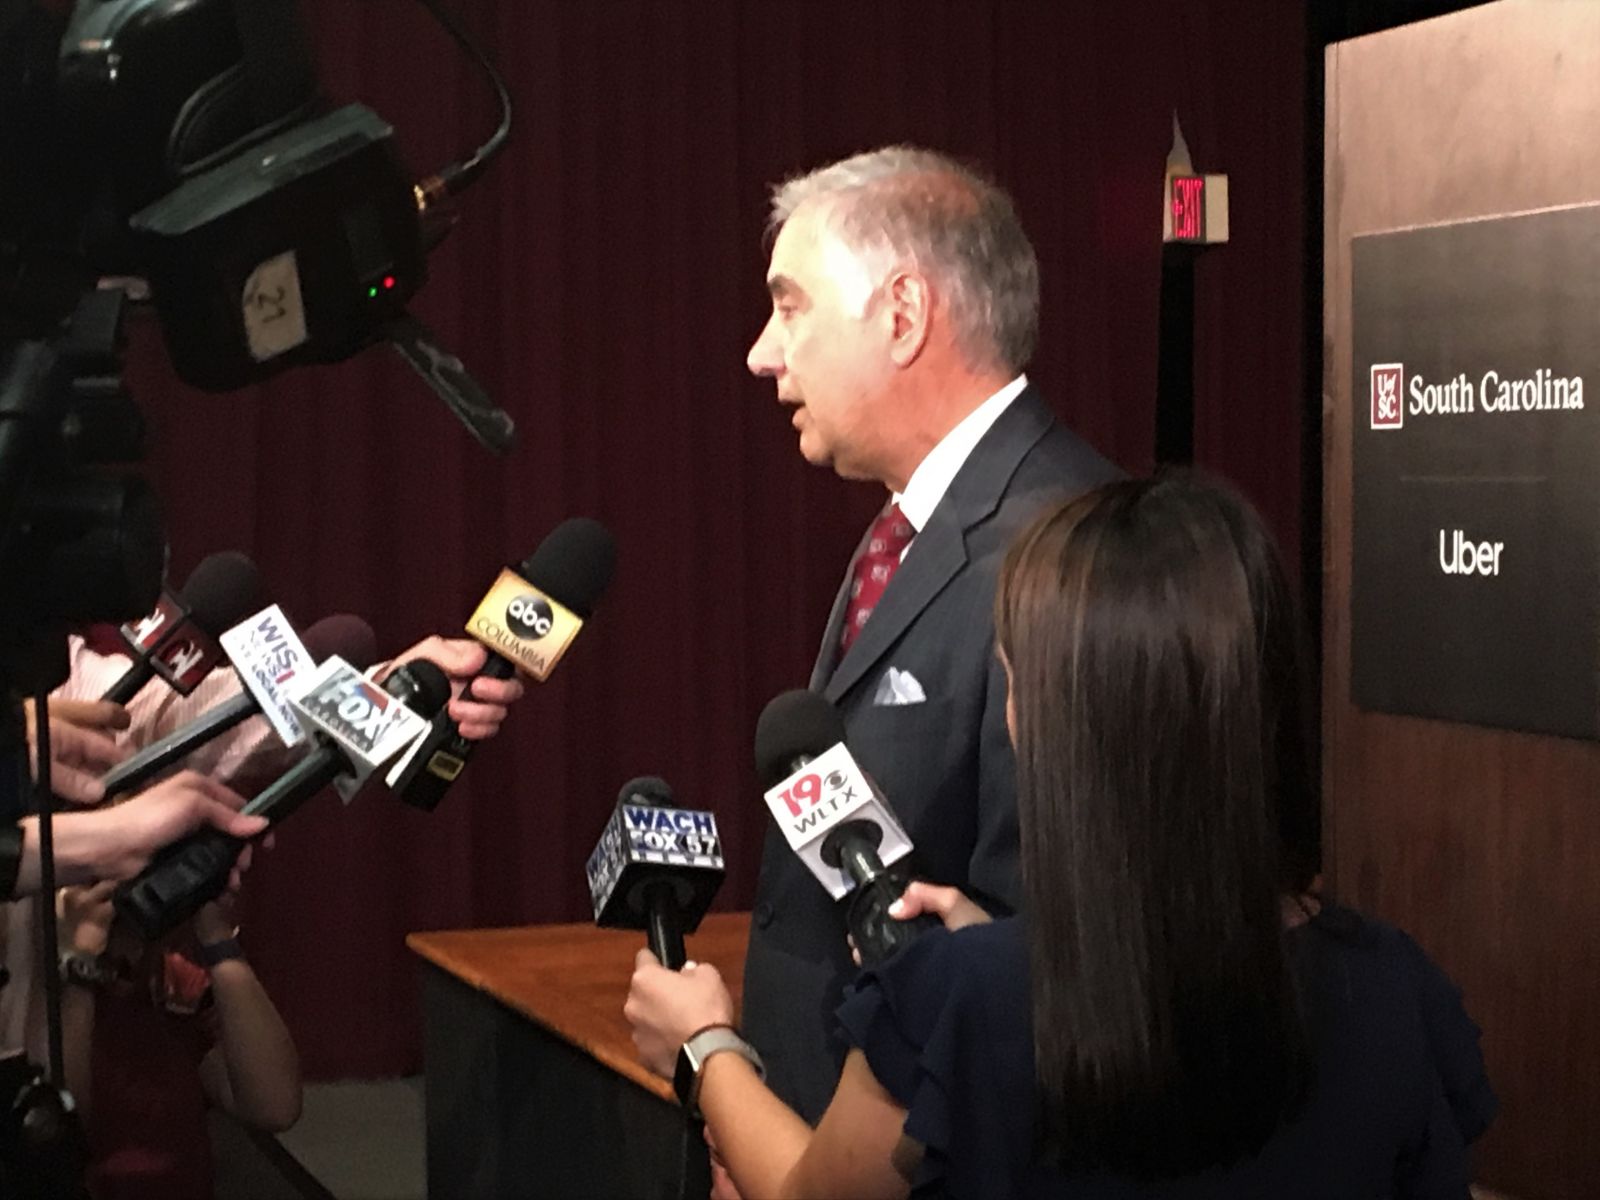 University of South Carolina president Harris Pastides addresses the media after Thursday's news conference announcing new ride-hailing safety measures in partnership with Uber. (Photo/Melinda Waldrop)